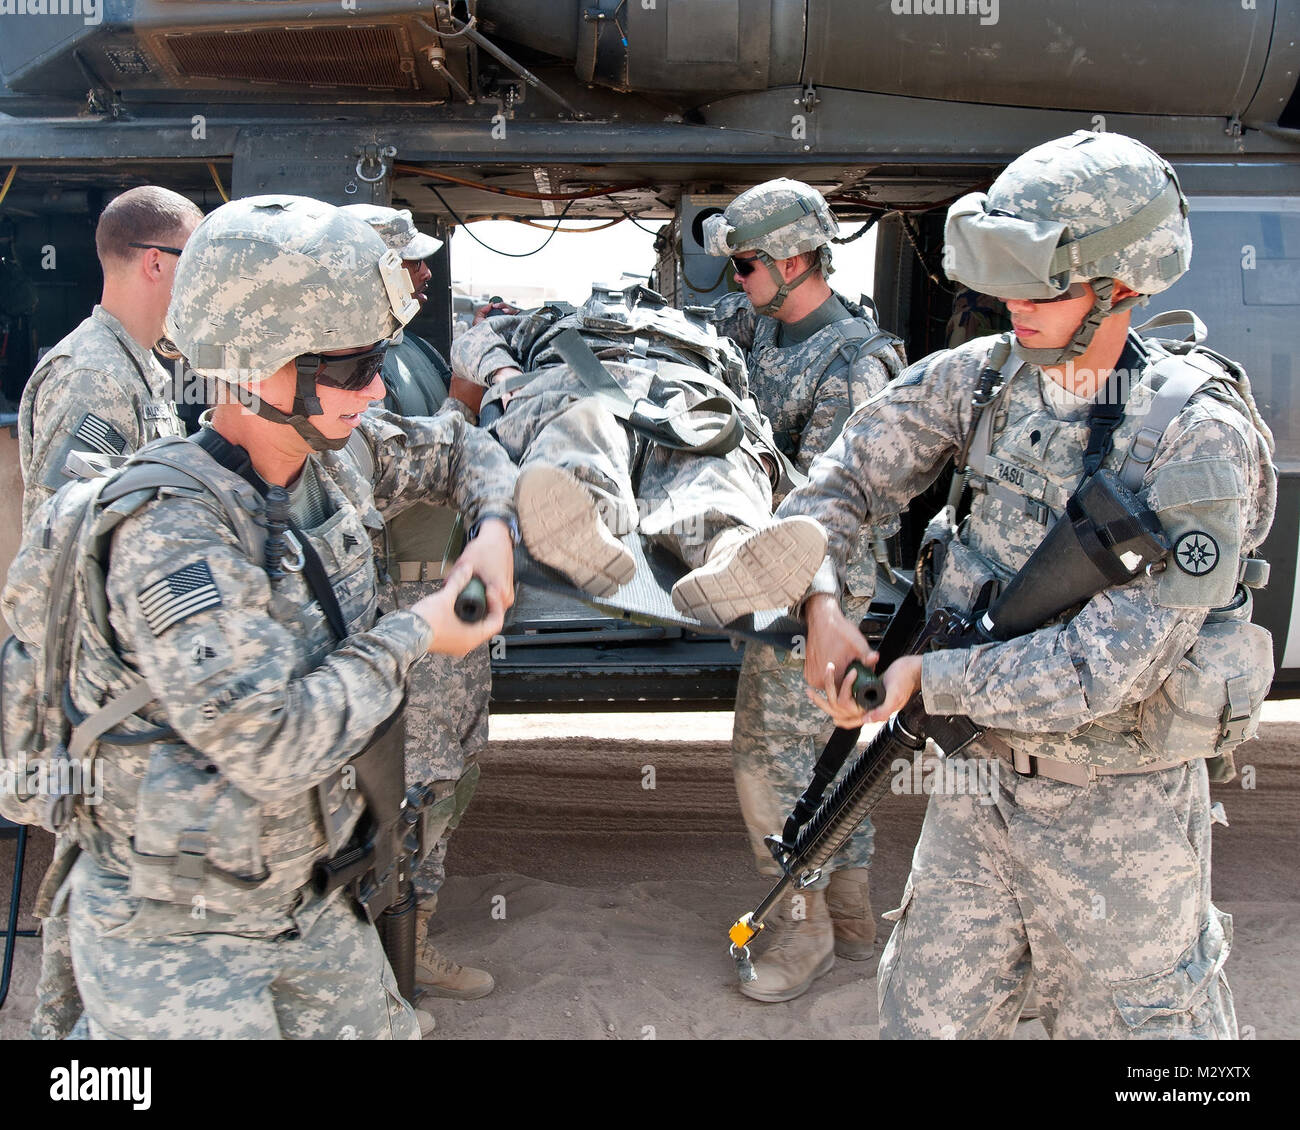 Spc. Bilal Rasul, a resident of Ravenna, Ohio, and a cook with the 316th Sustainment Command (Expeditionary), and other Soldiers practice the proper technique to load and unload casualties from a UH-60 Blackhawk helicopter while attending Warrior Leader Course, class 12-709, at Camp Buehring, Kuwait, Aug. 24.  (U.S. Army Photo By Staff Sgt. Peter J. Berardi, 316th Sustainment Command (Expeditionary)) Medevac Training at WLC by 316th ESC Stock Photo